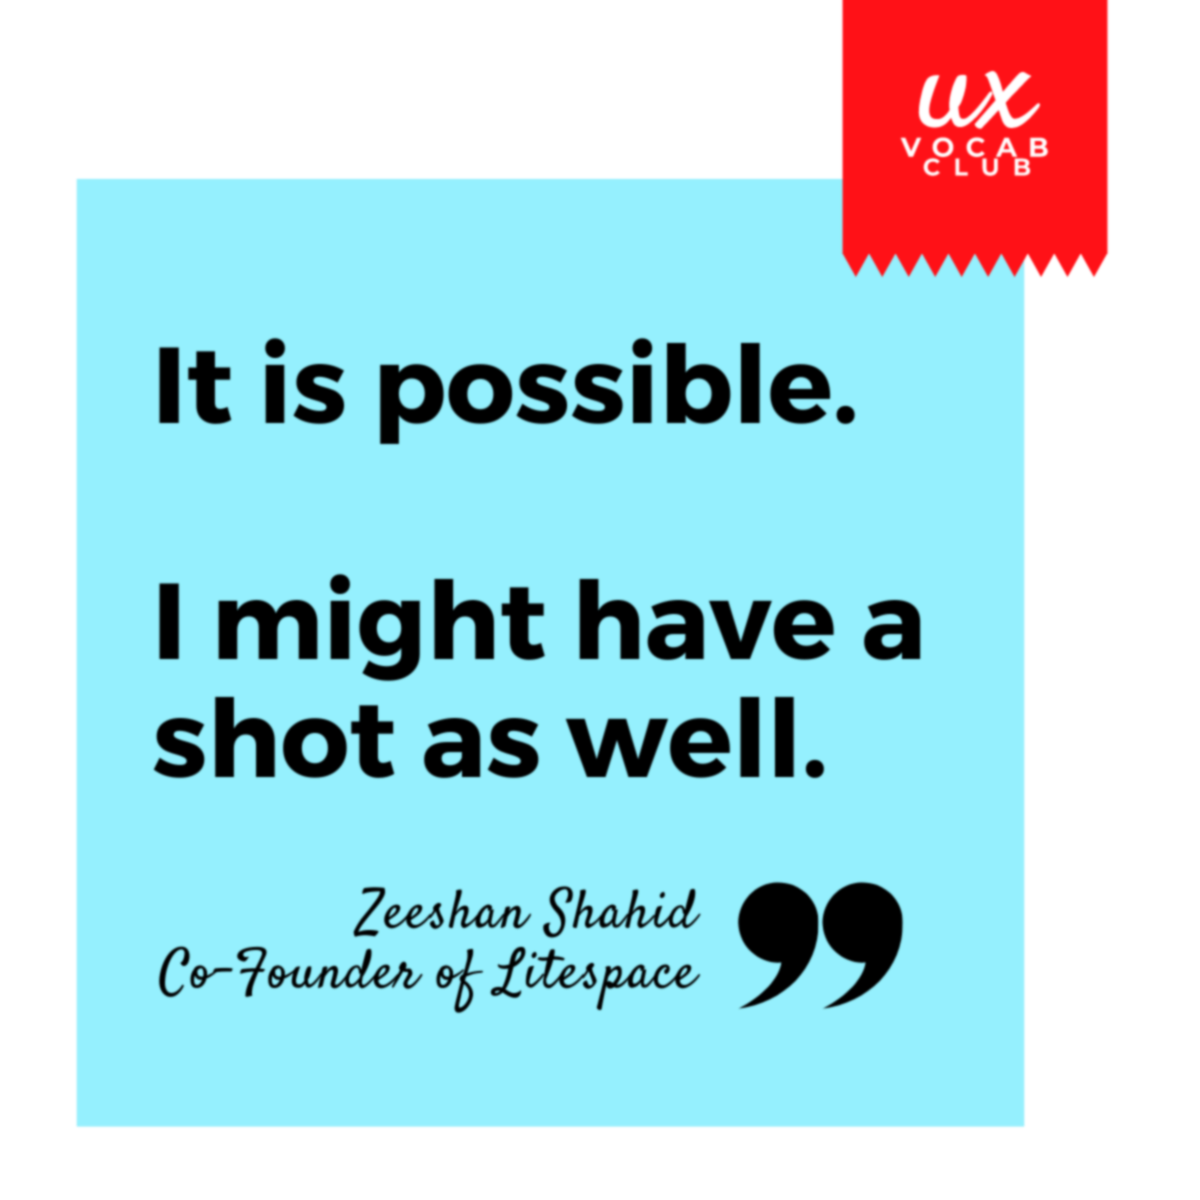 Quote from Zeeshan Shahid, Co-Founder of Litespace